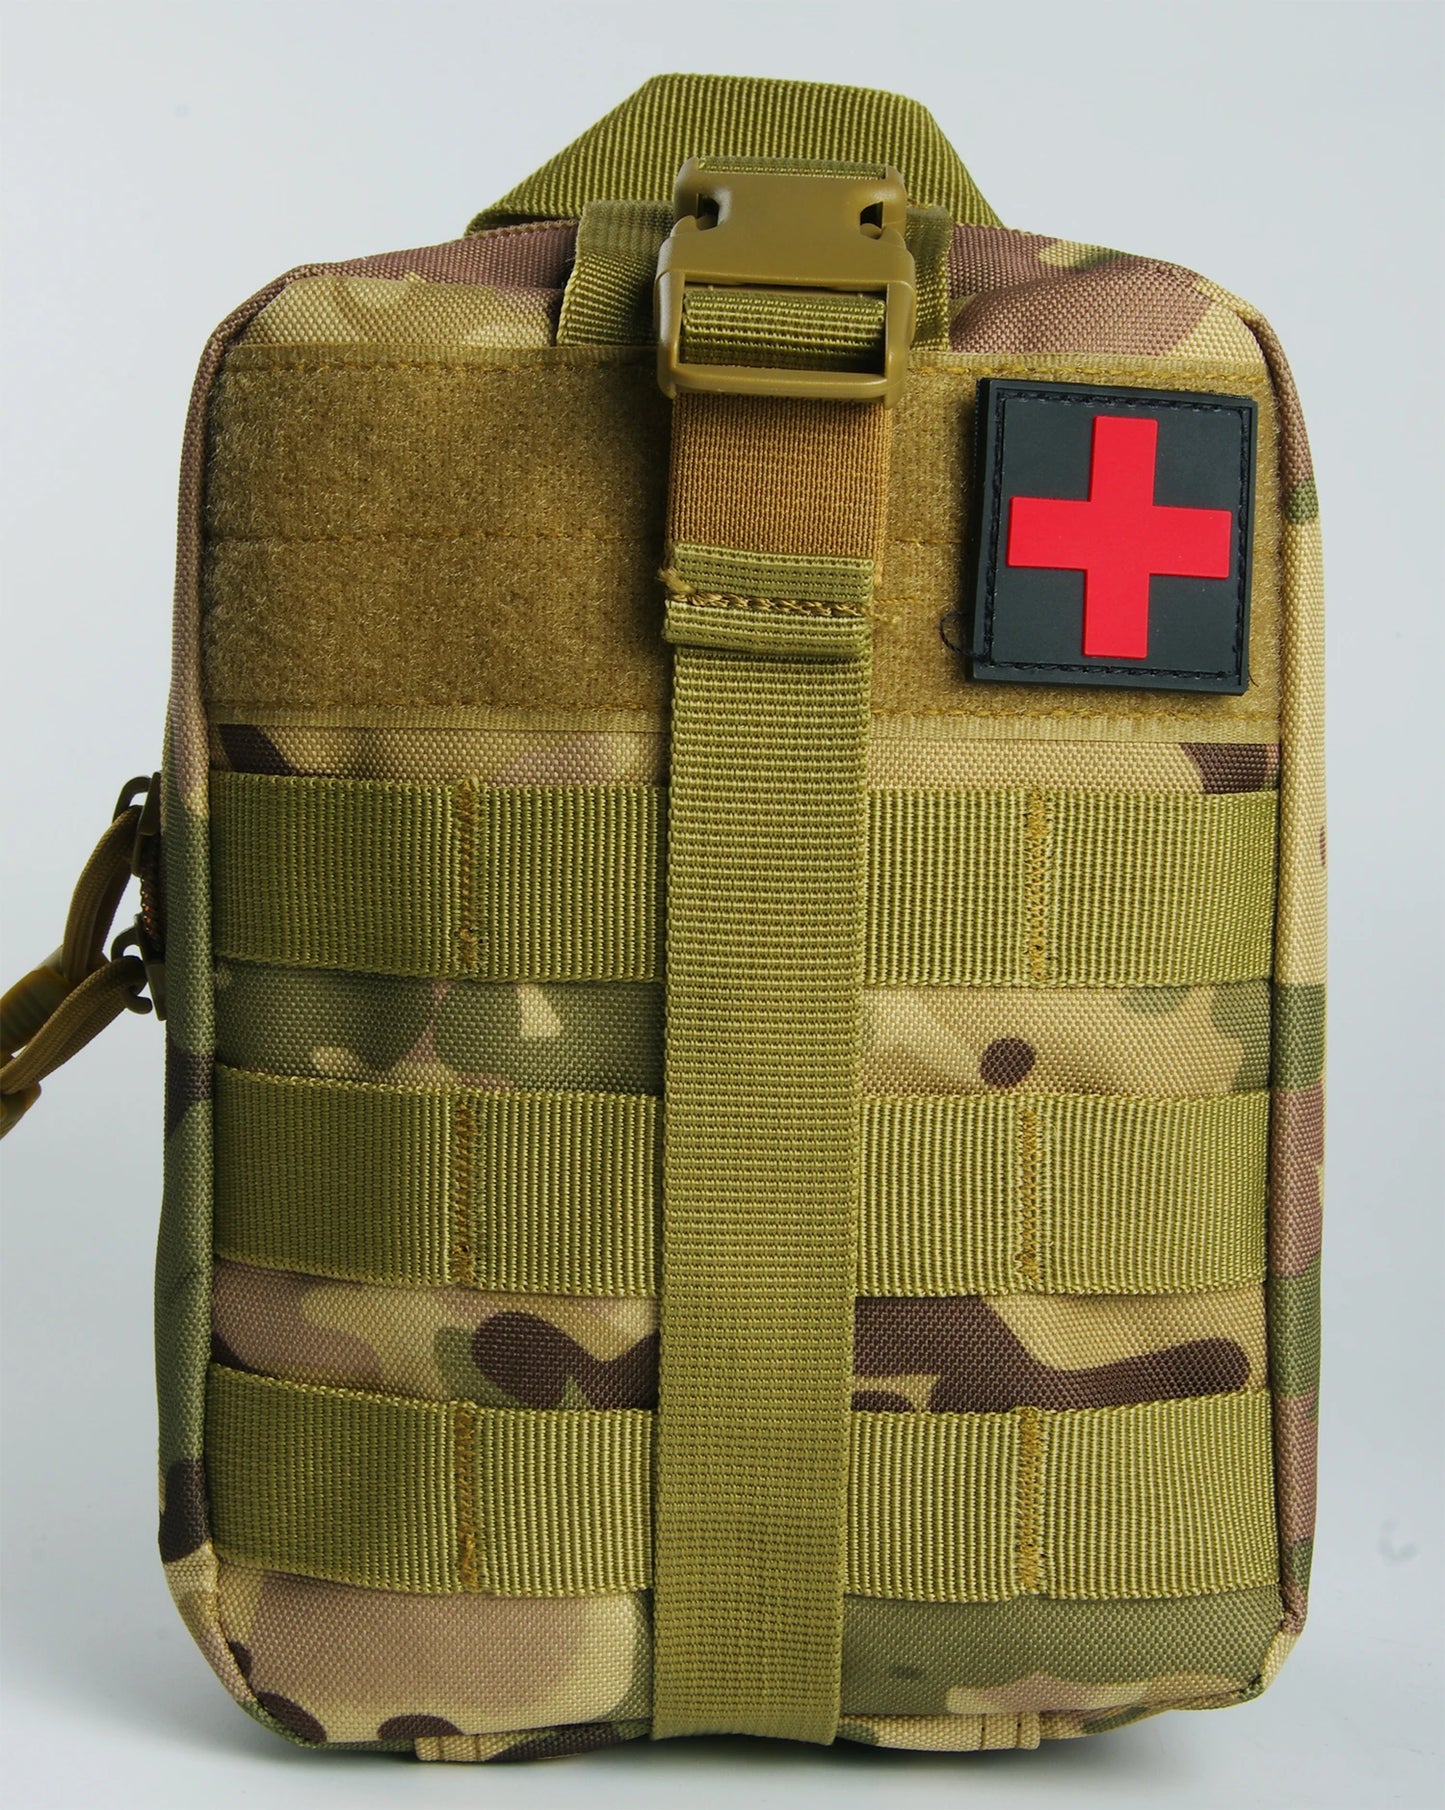 First Aid Medical Pouch Emergency Survival Gear